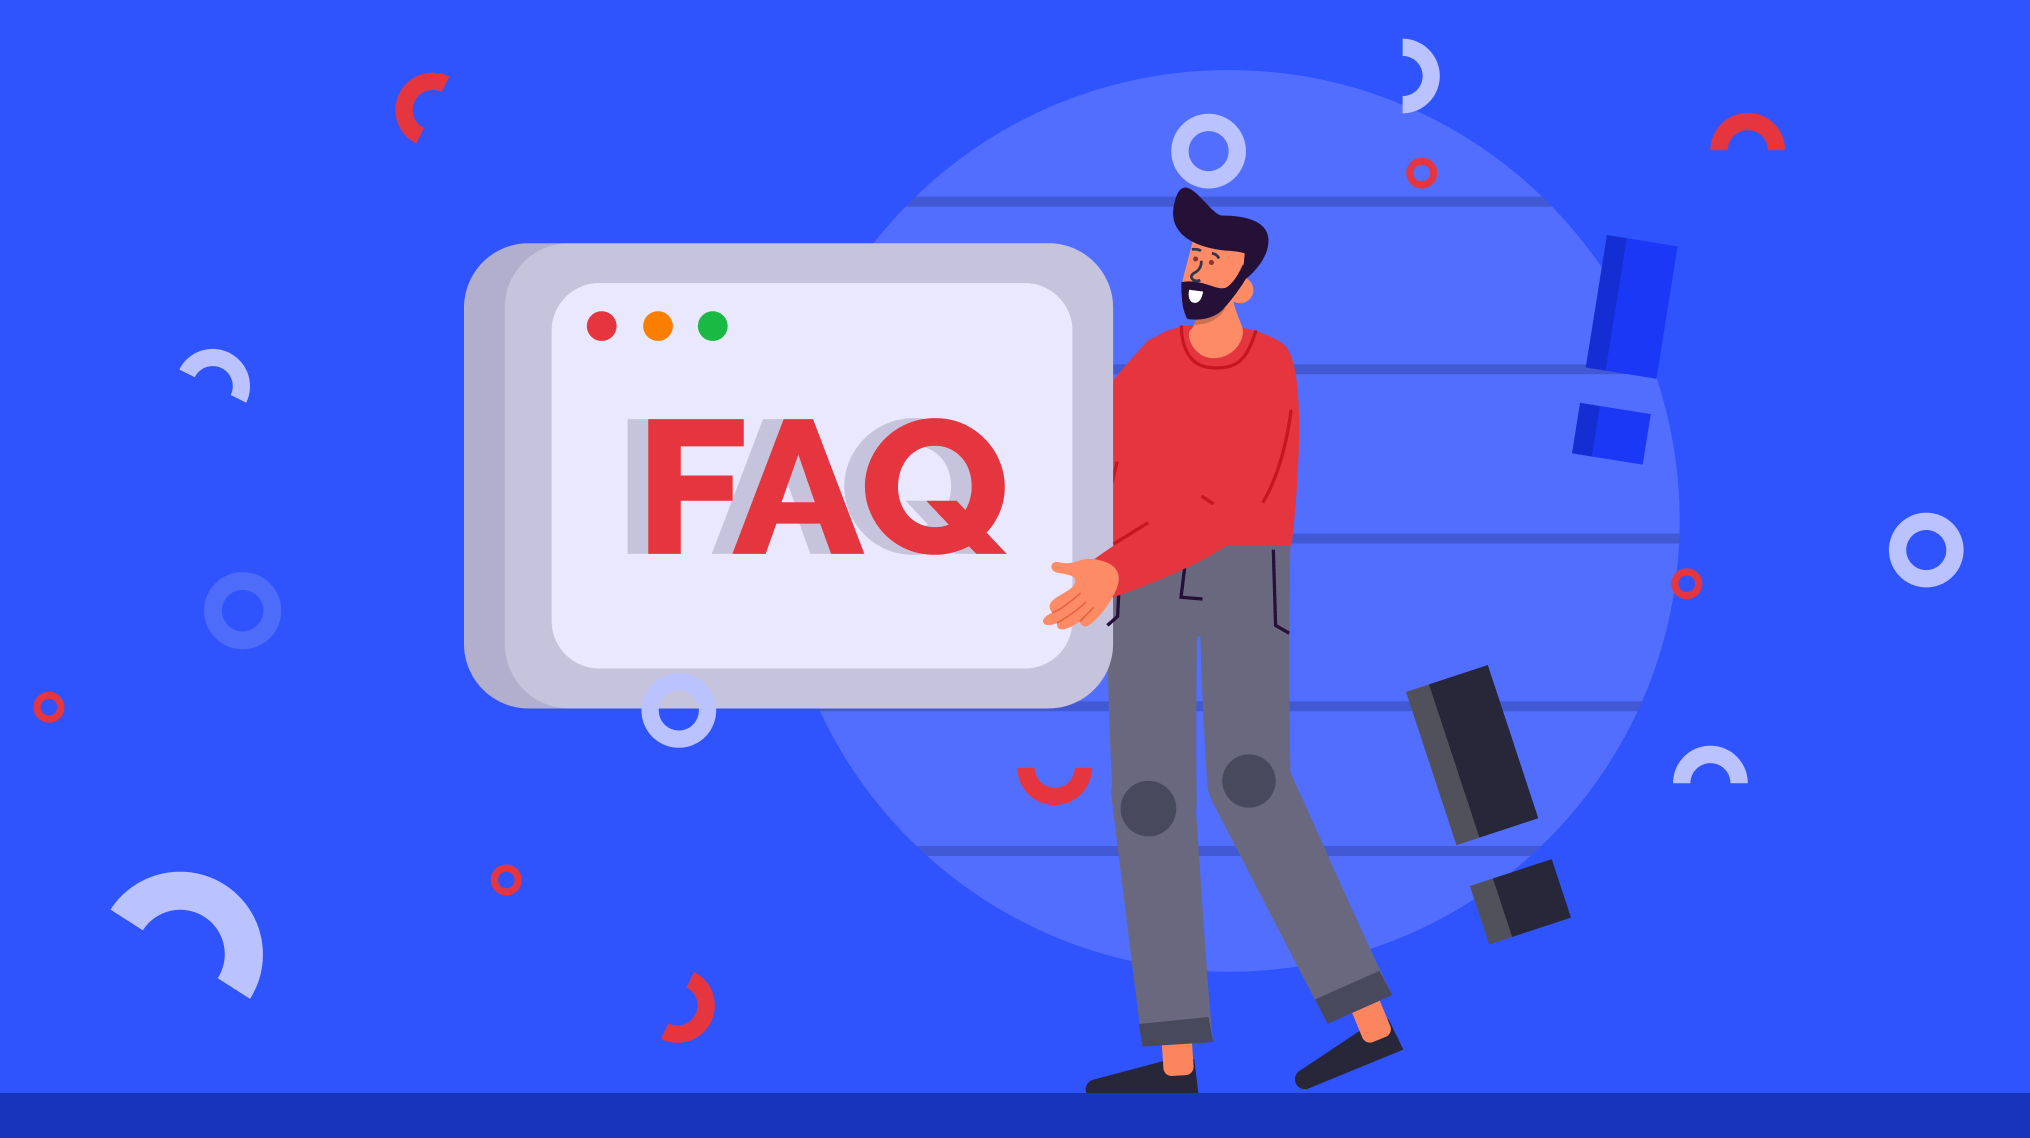 ePayments Payment Services are changed - FAQ